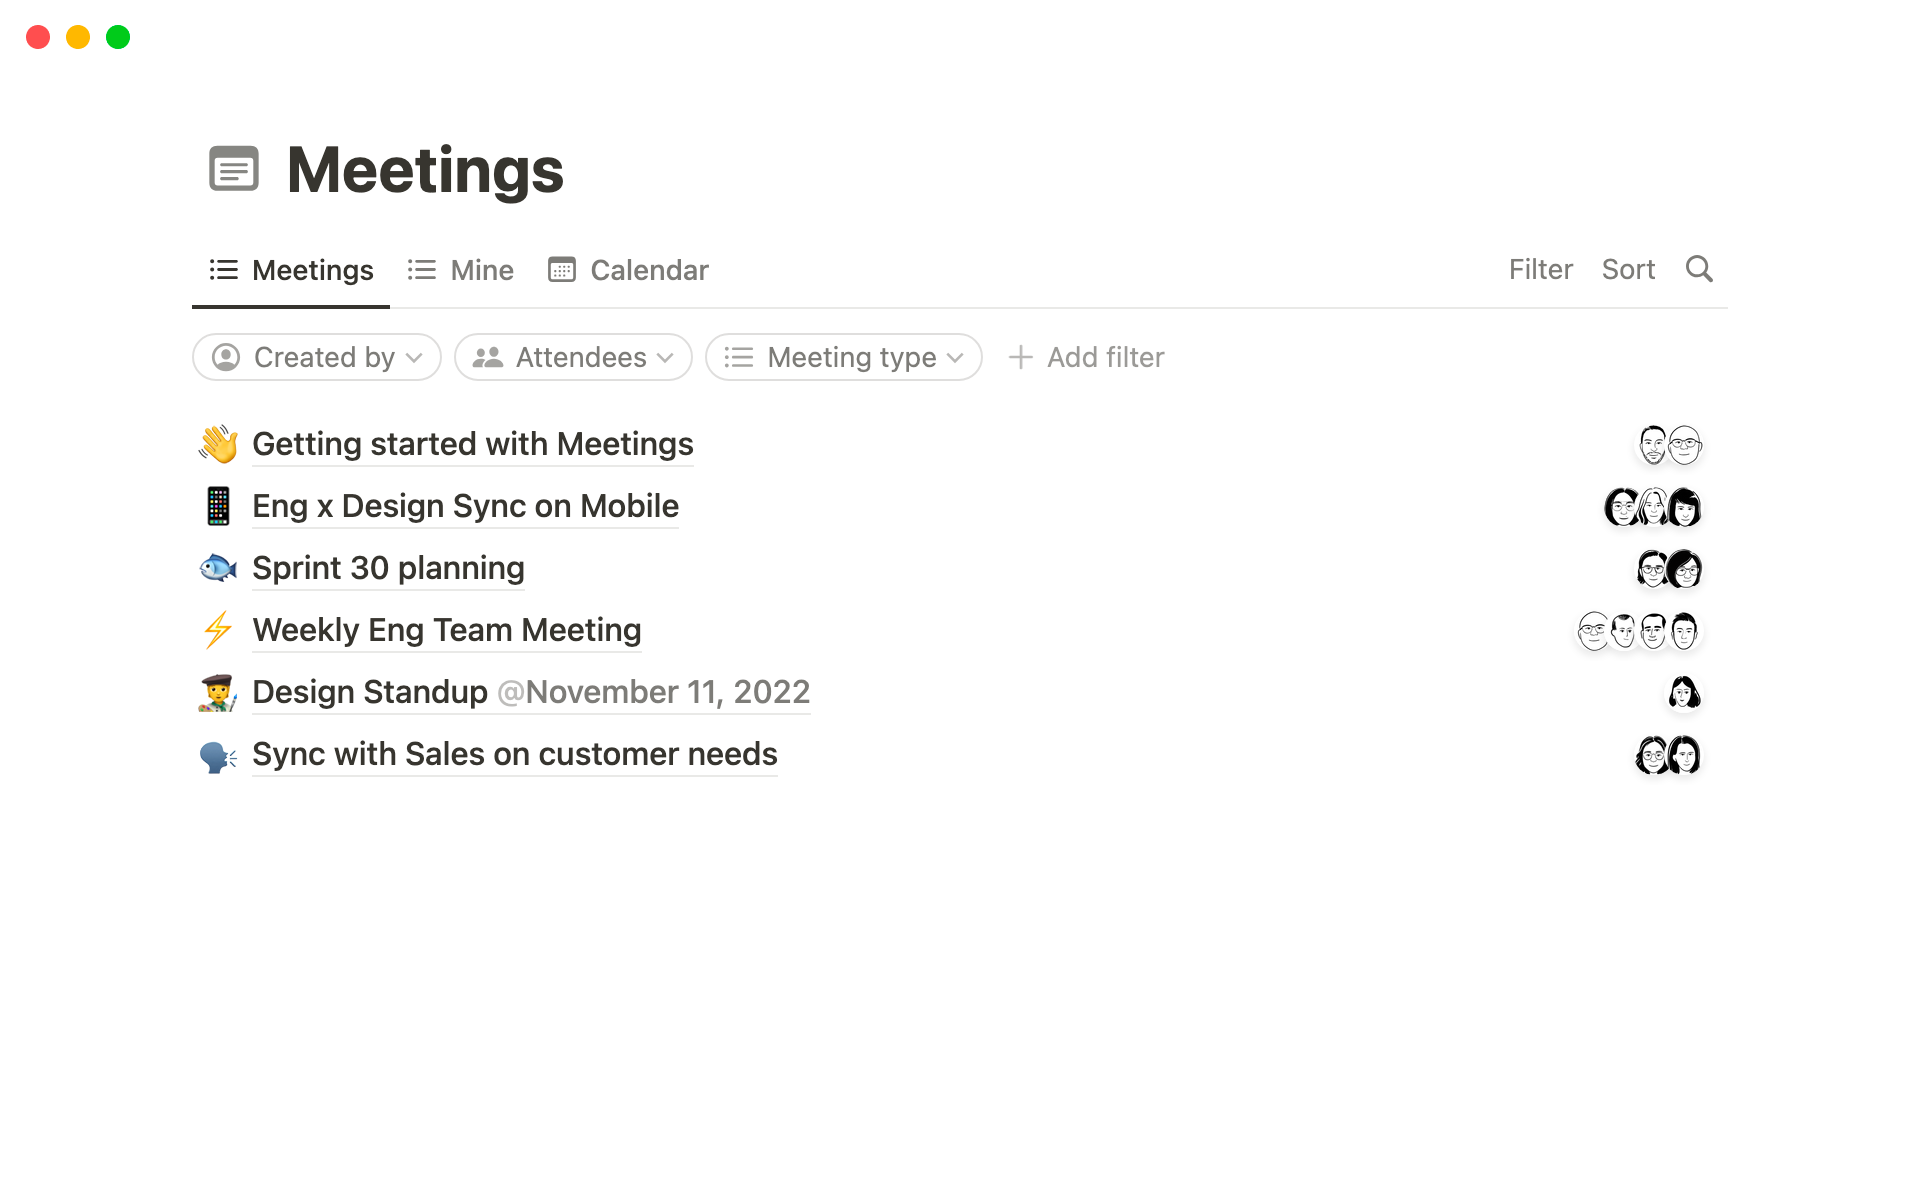 Organize team meetings in one place, with agendas, notes, and a calendar view.